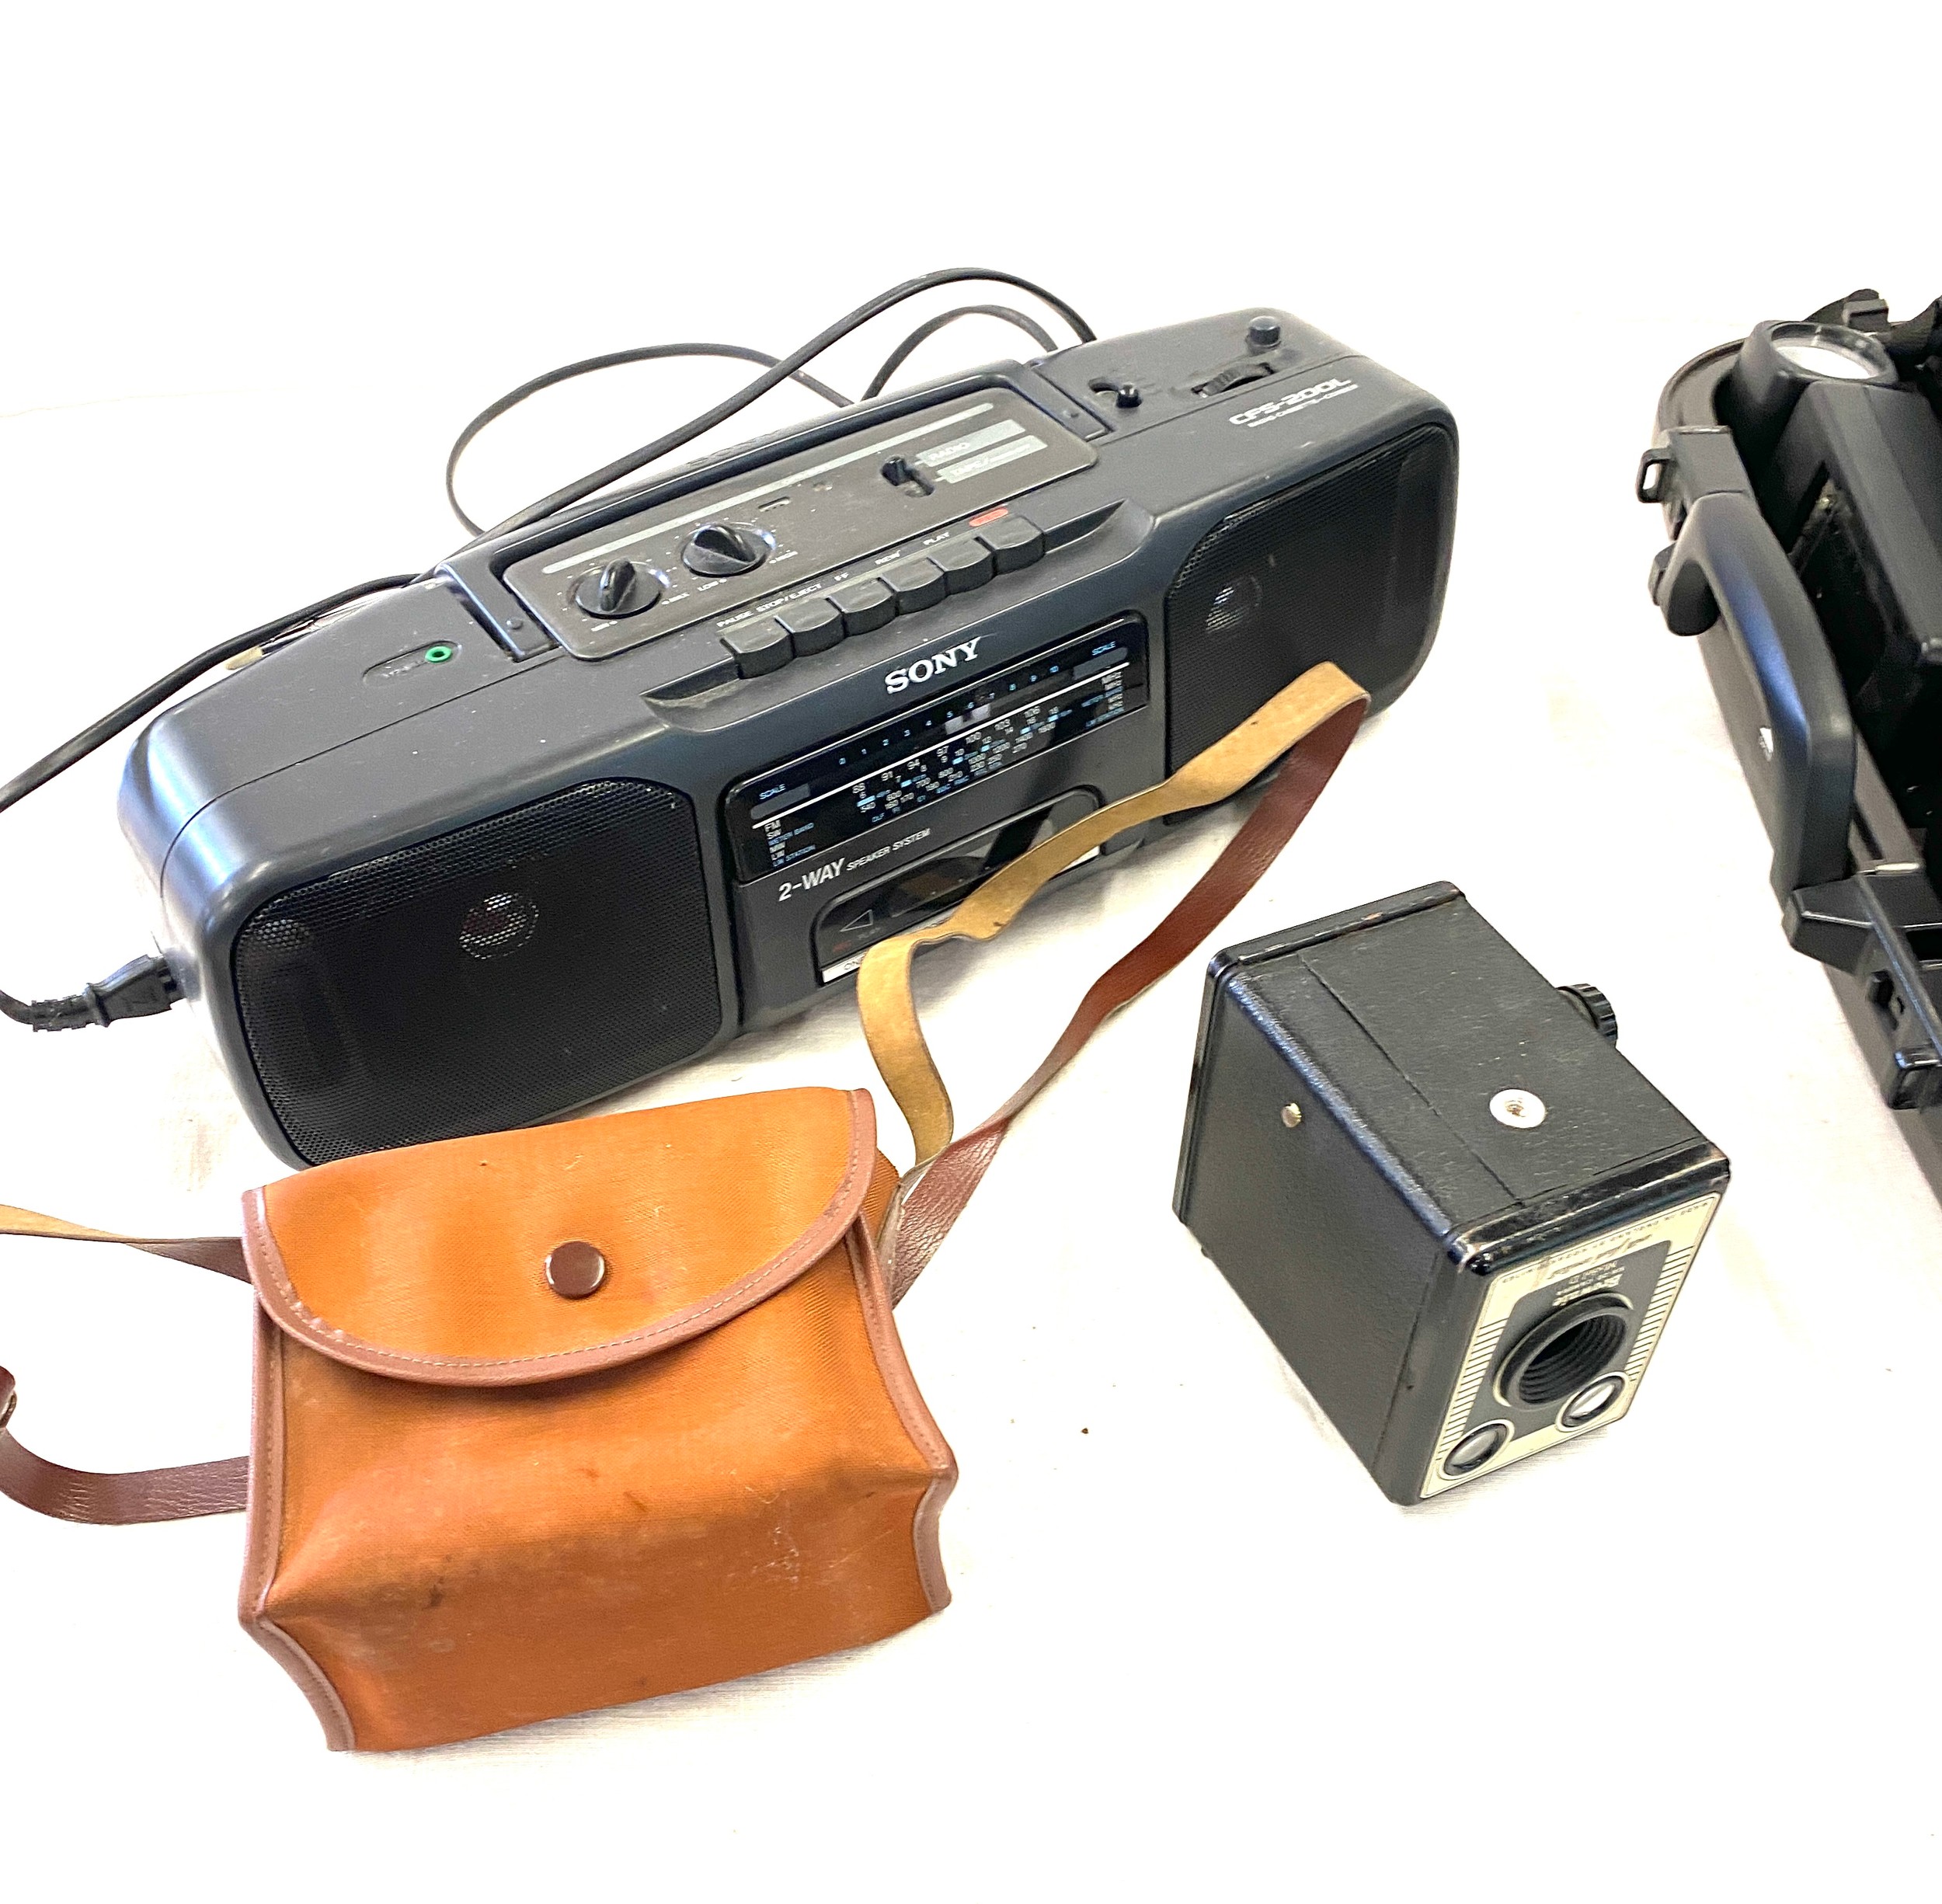 Selection of electrical items to Sony radio cassette, Hitachi case cam-recorder, Brownie Model D - Image 3 of 4